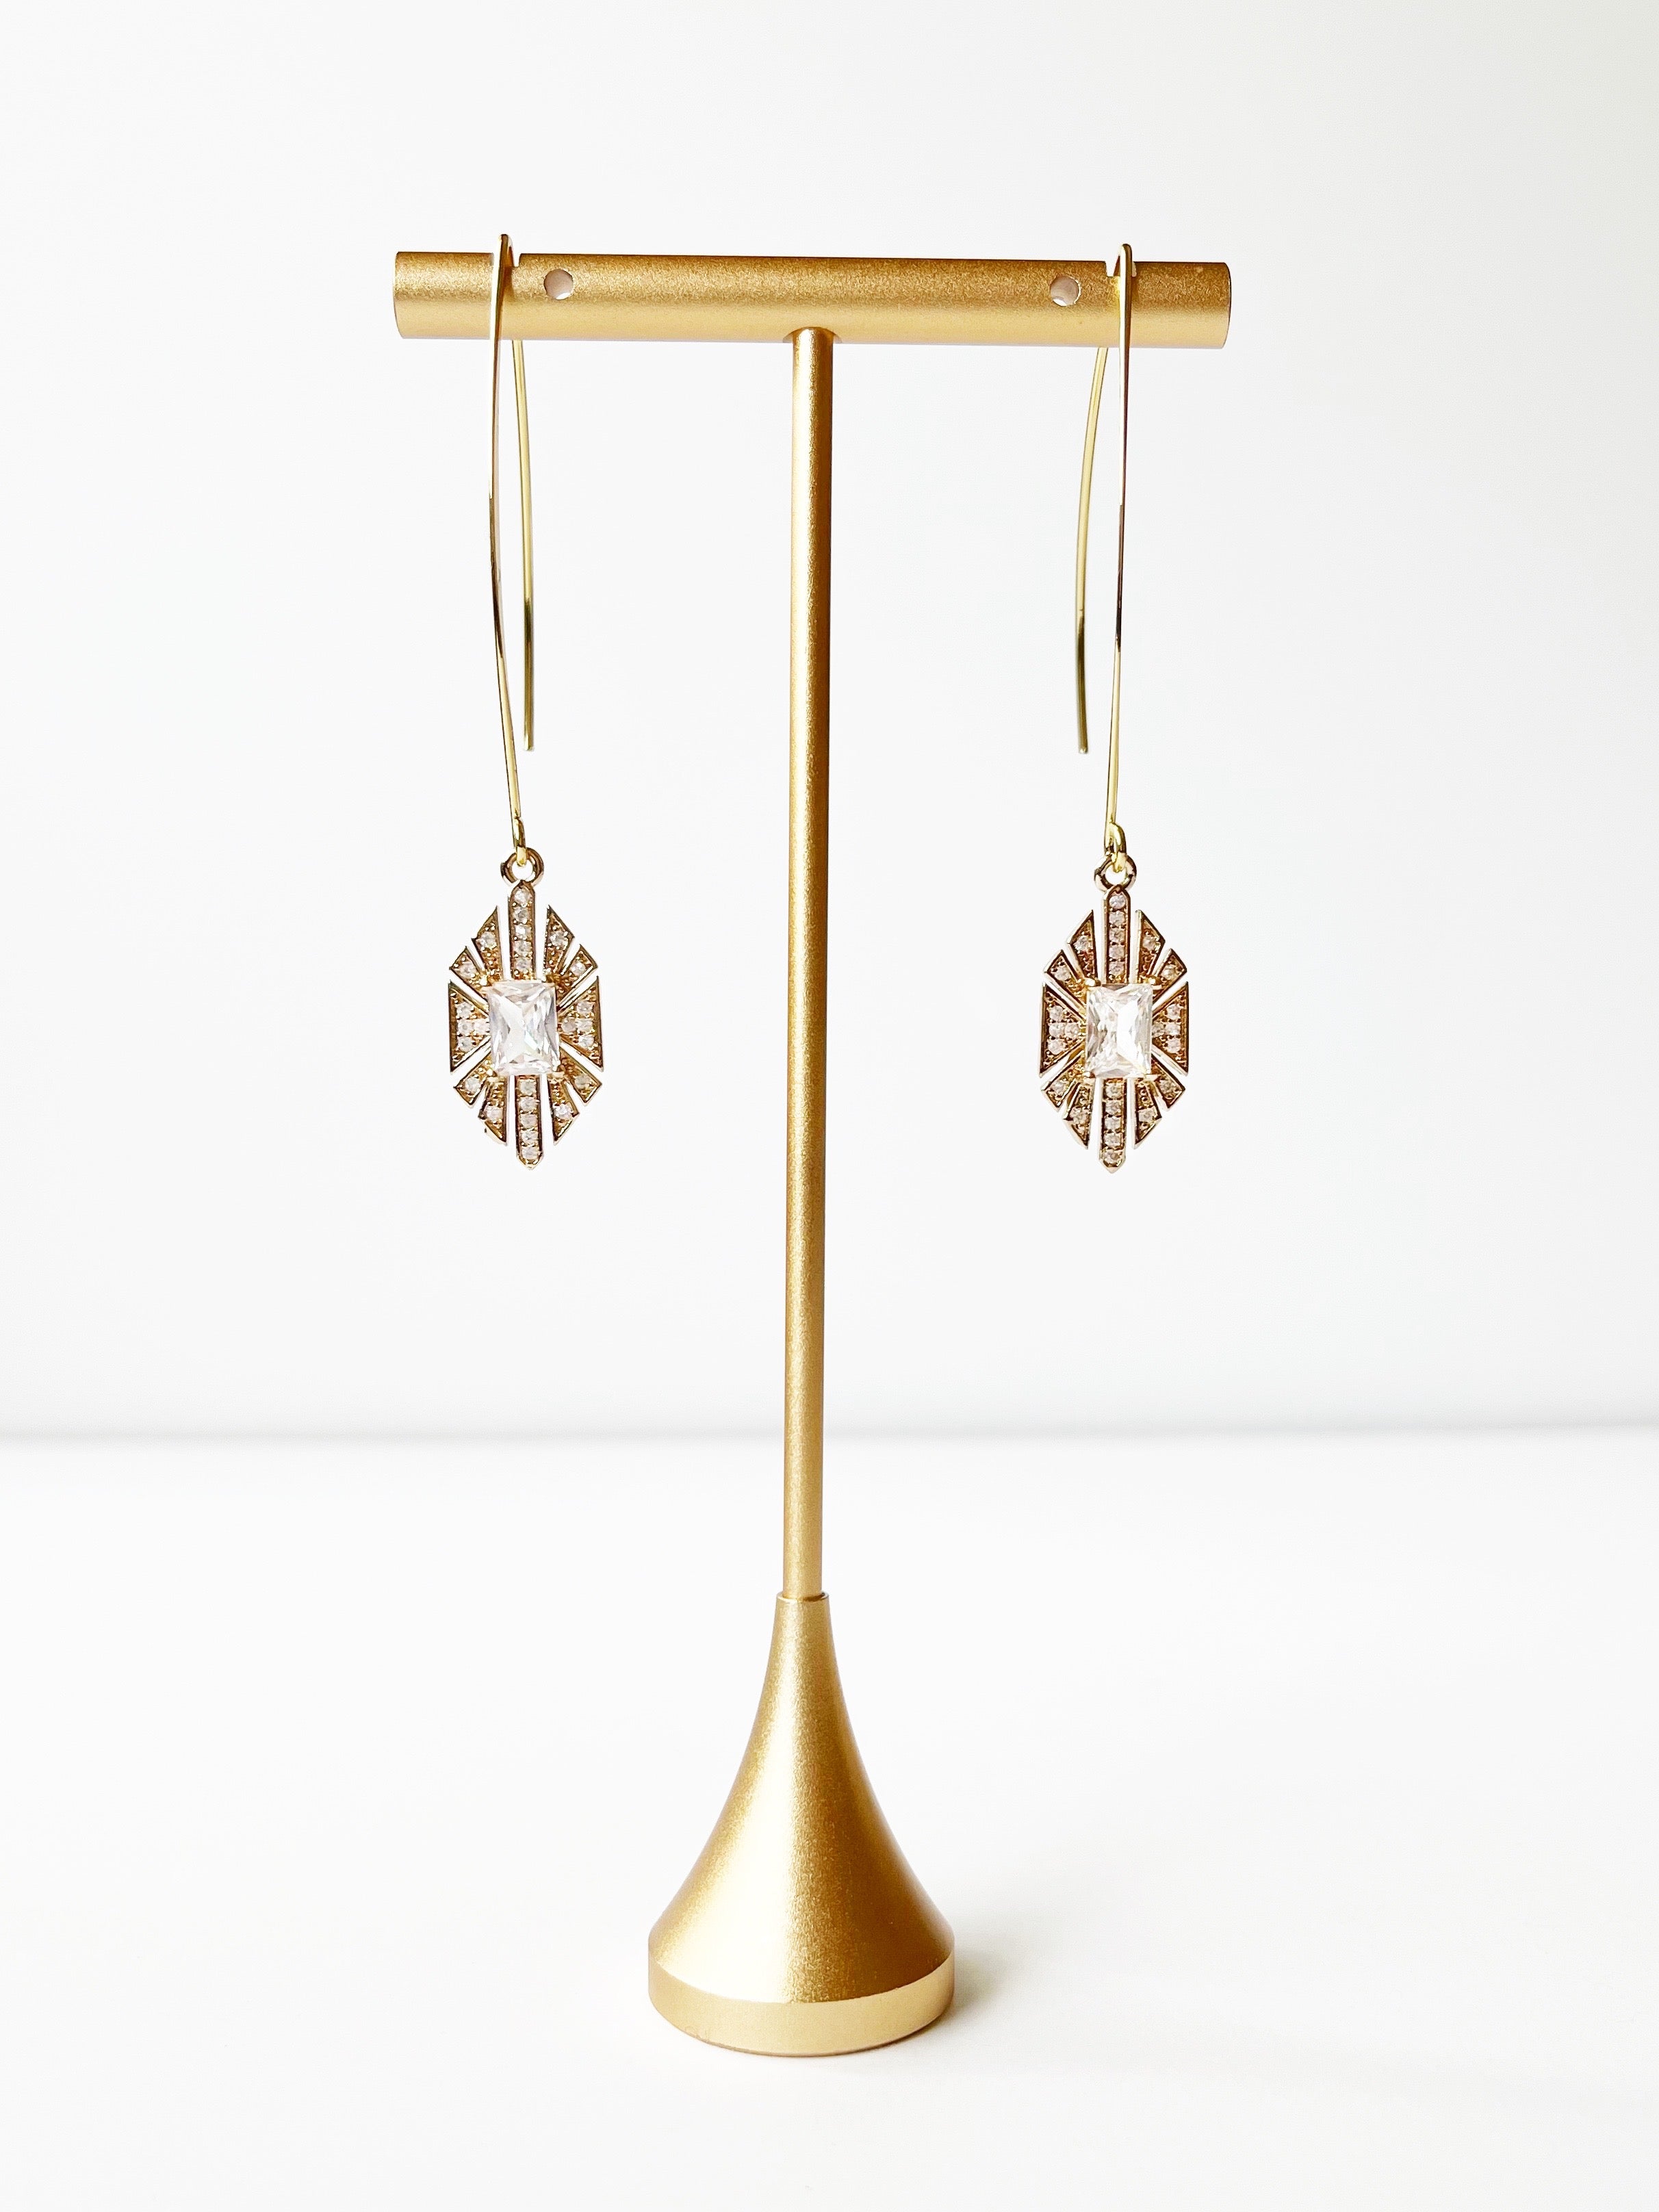 crystal and gold threader earrings displayed on gold earring stand